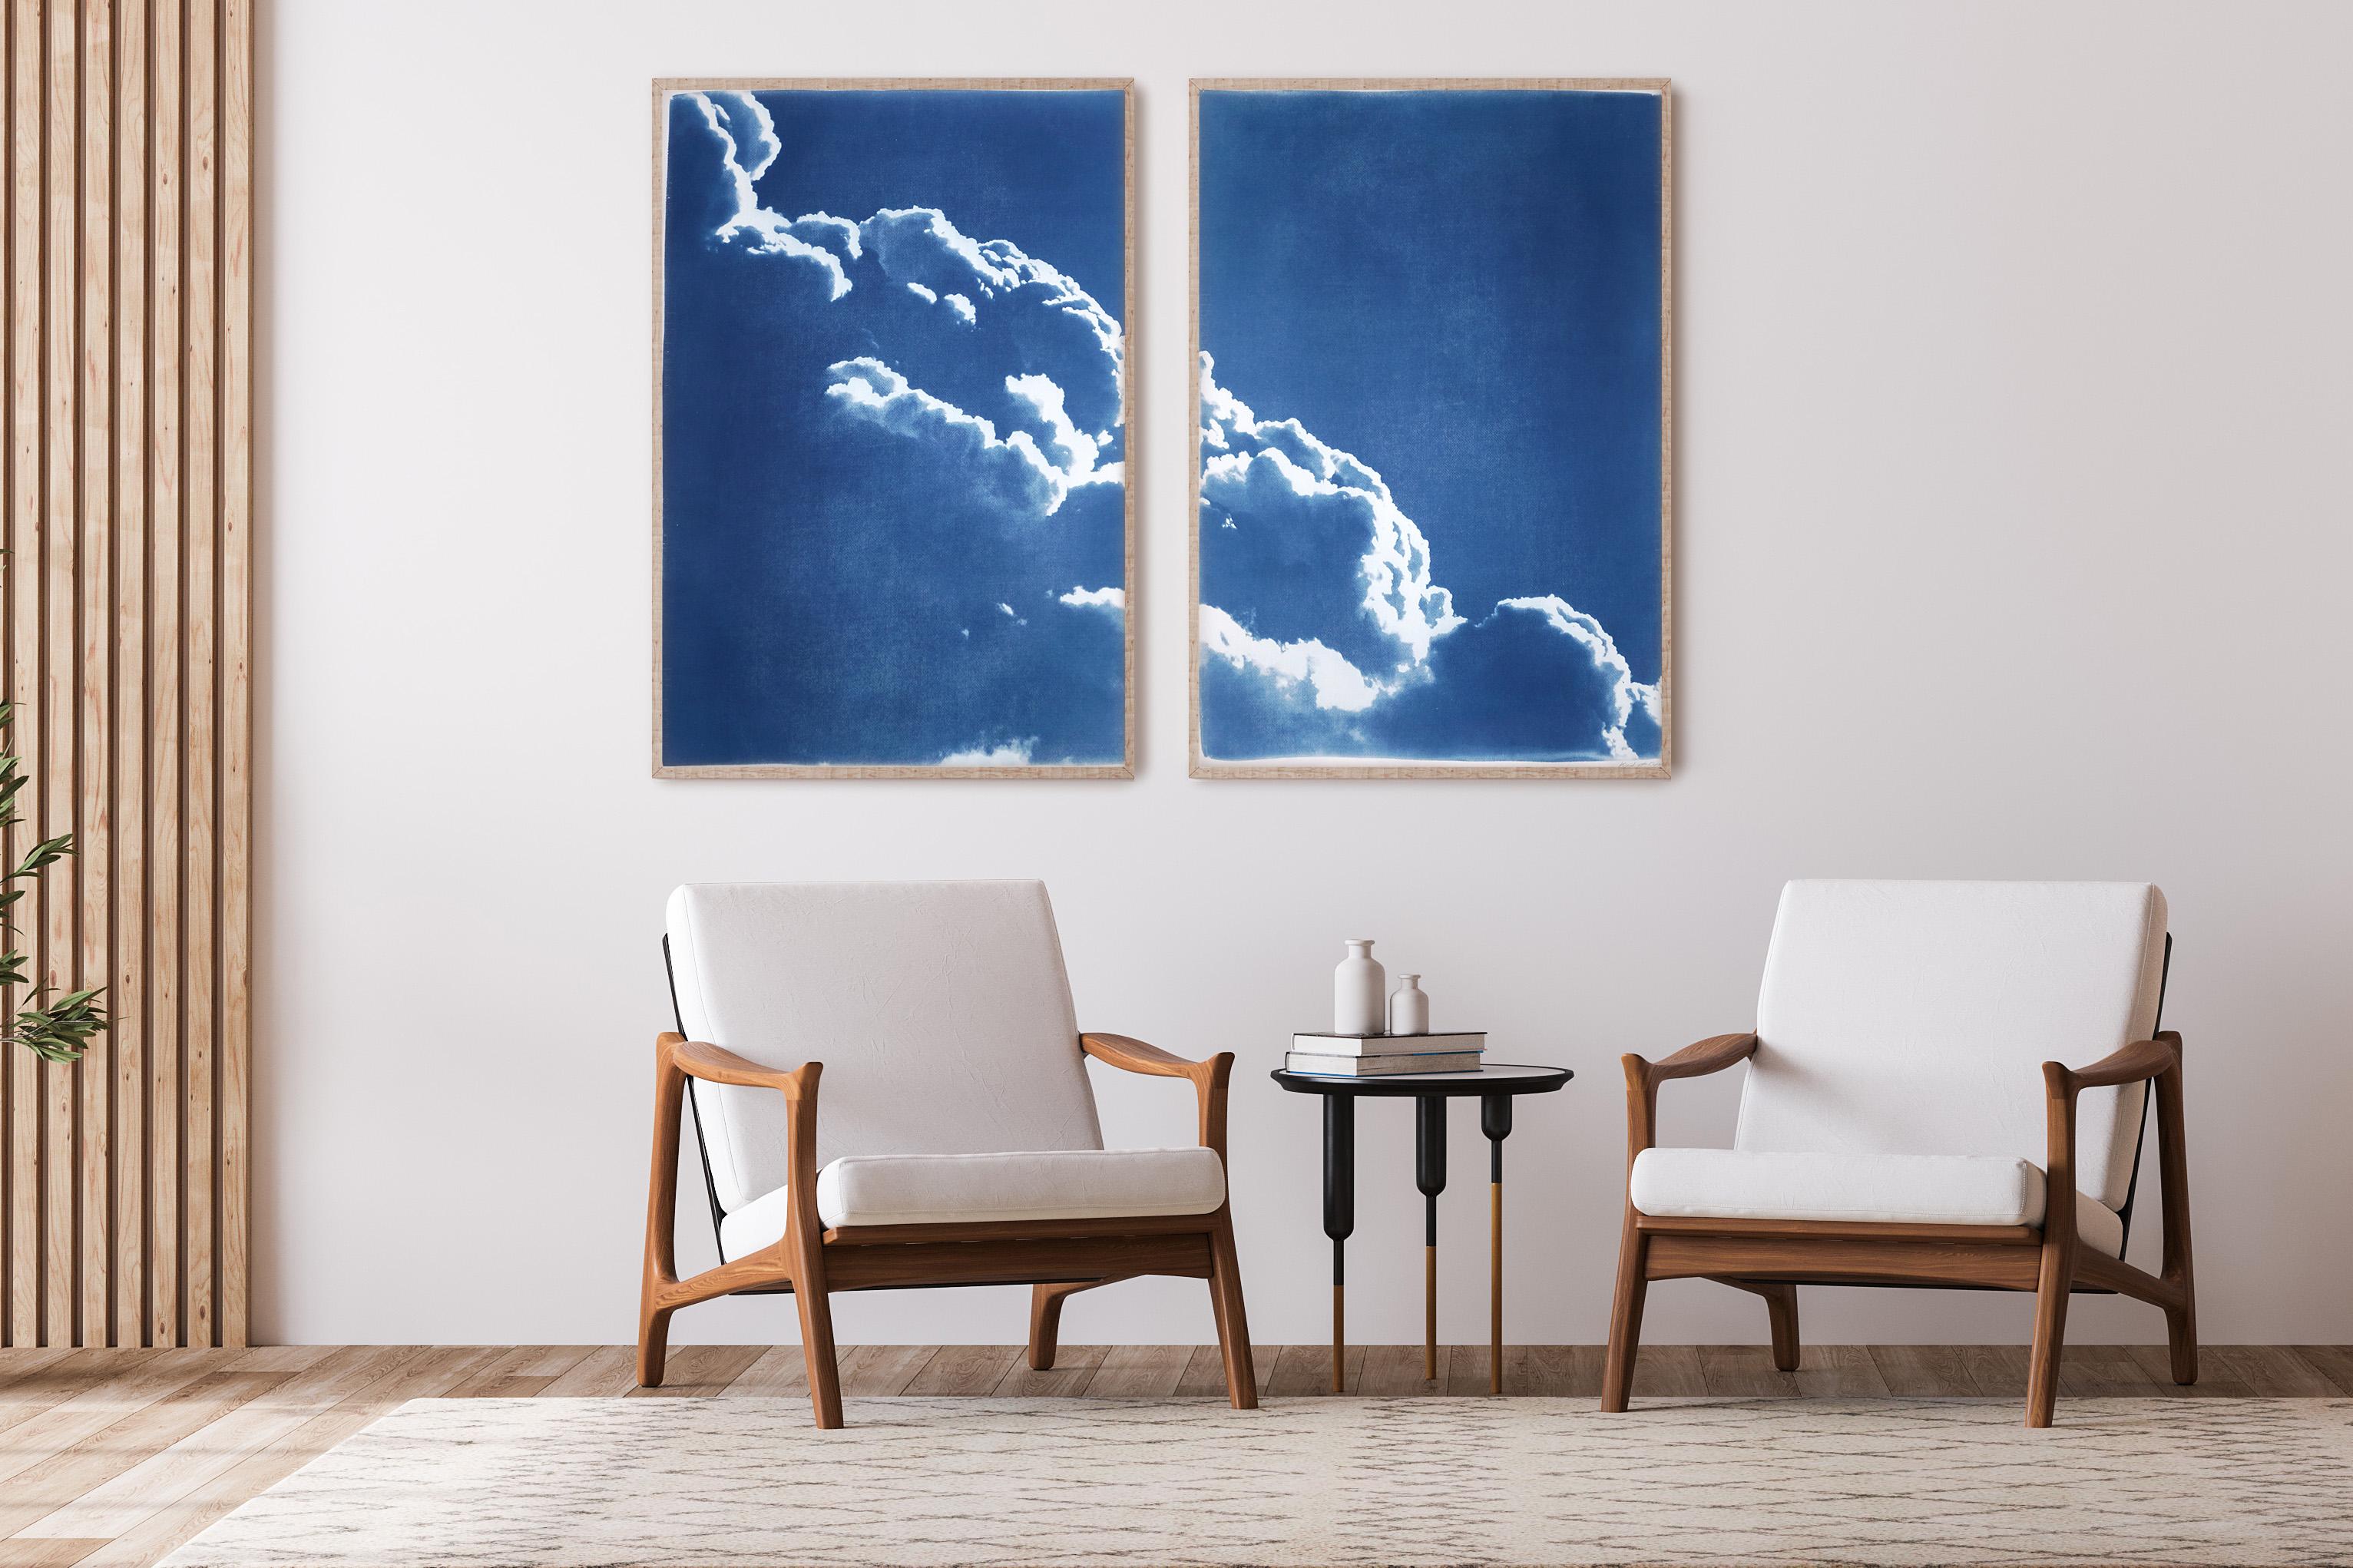 Diptych of Floating Clouds, Blue Tones Sky Scene Cyanotype Print of Silky Shapes - Photograph by Kind of Cyan